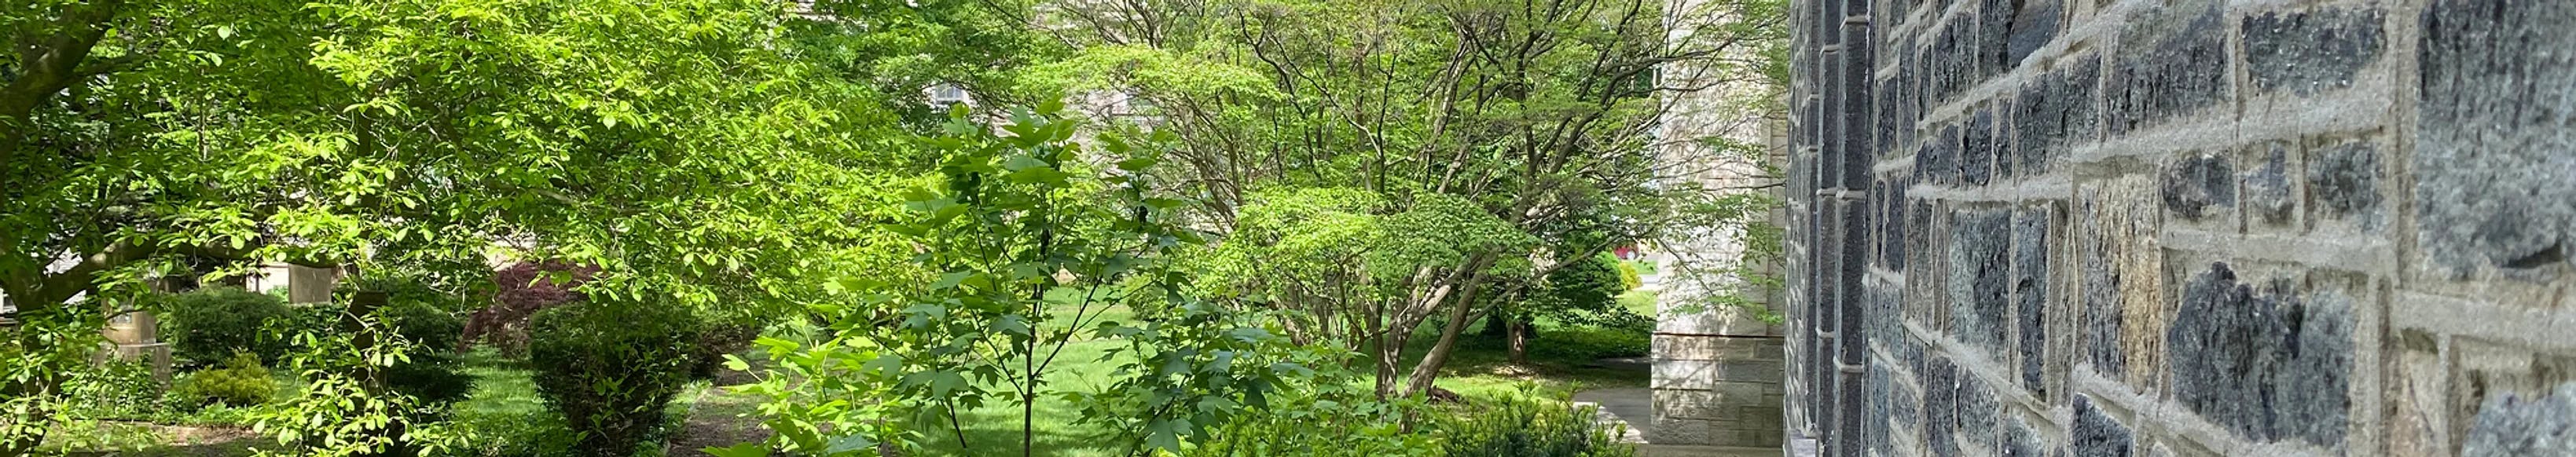 image of trees